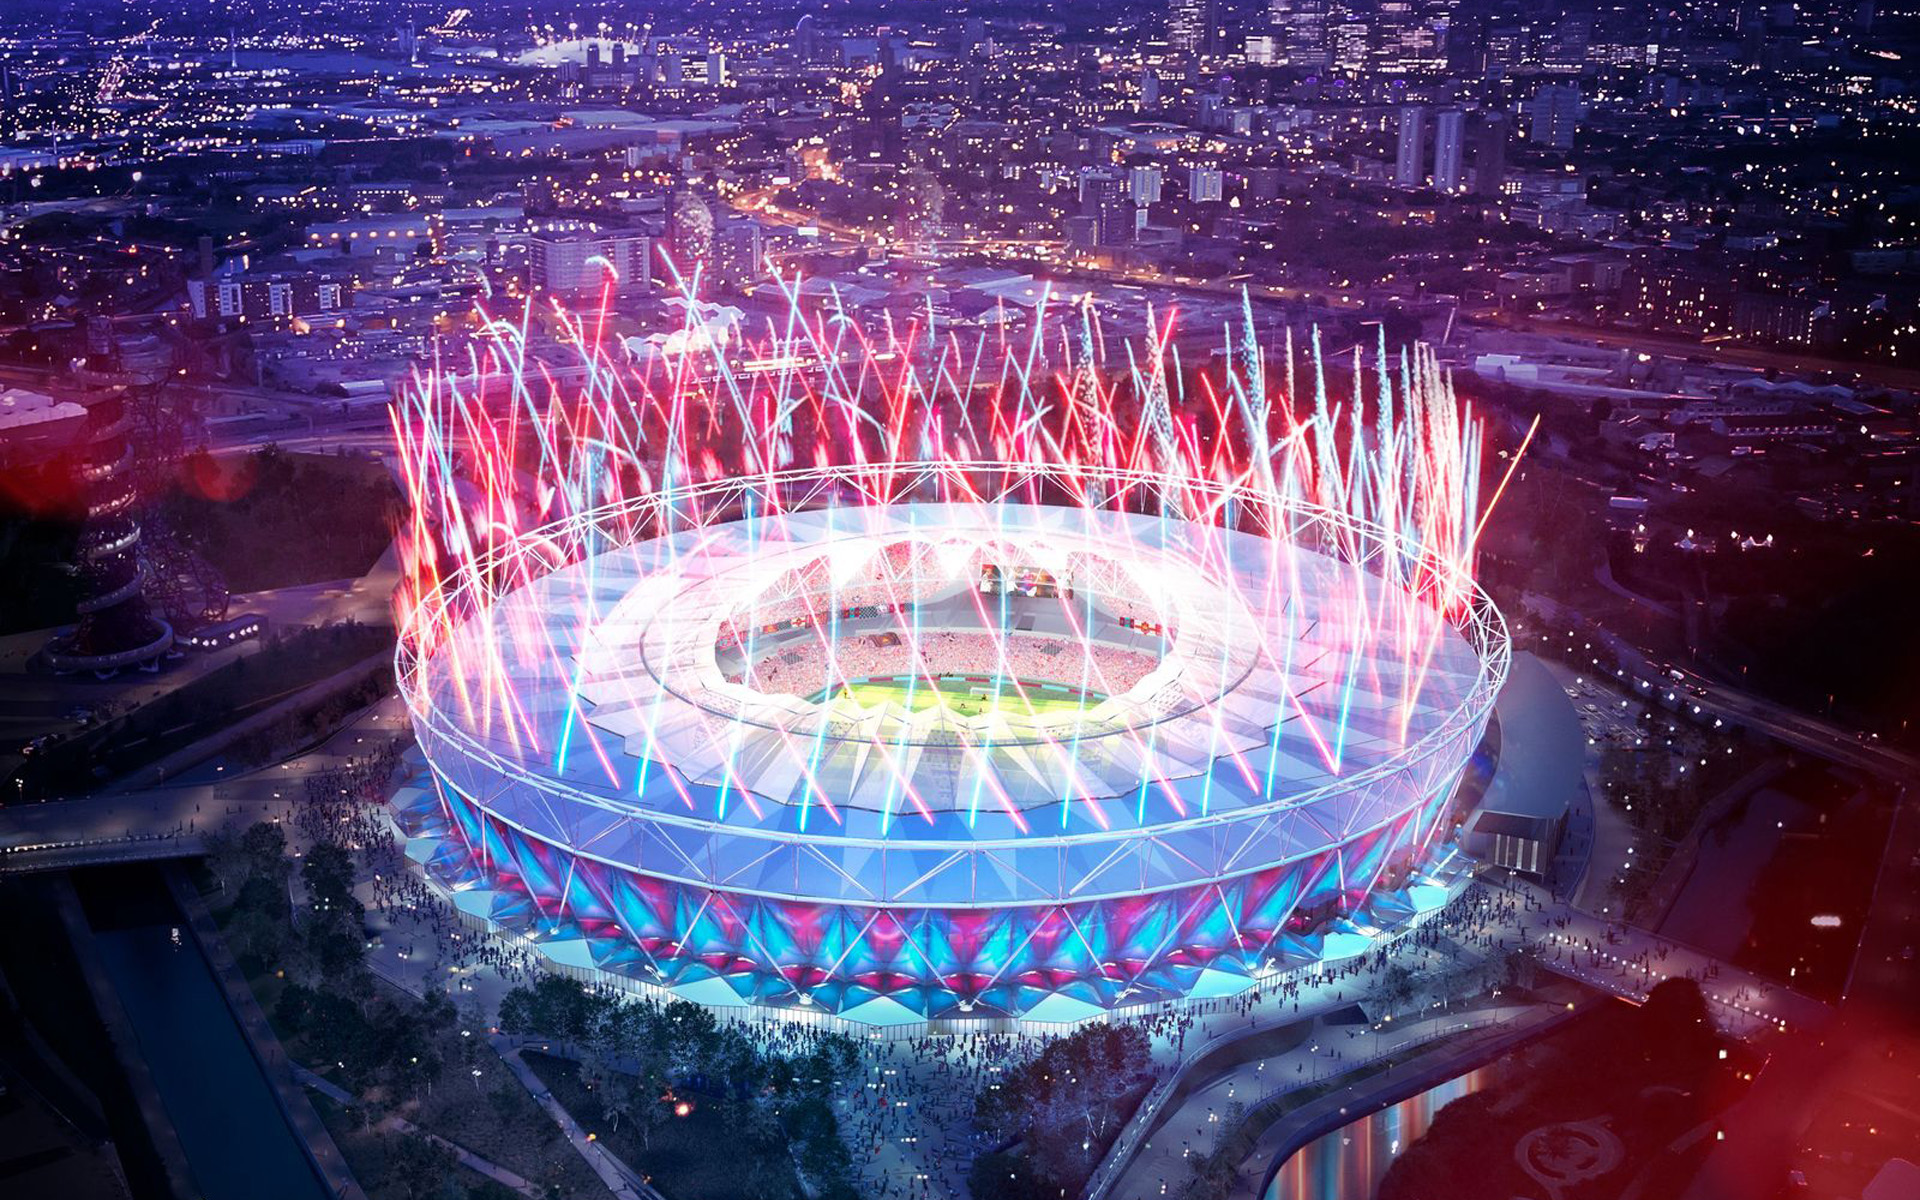 Download wallpaper London Stadium, aerial view, fireworks, night, english stadiums, West Ham United Stadium, football stadium, London, England, United Kingdom, West Ham United FC, London Olympic Stadium for desktop with resolution 1920x1200